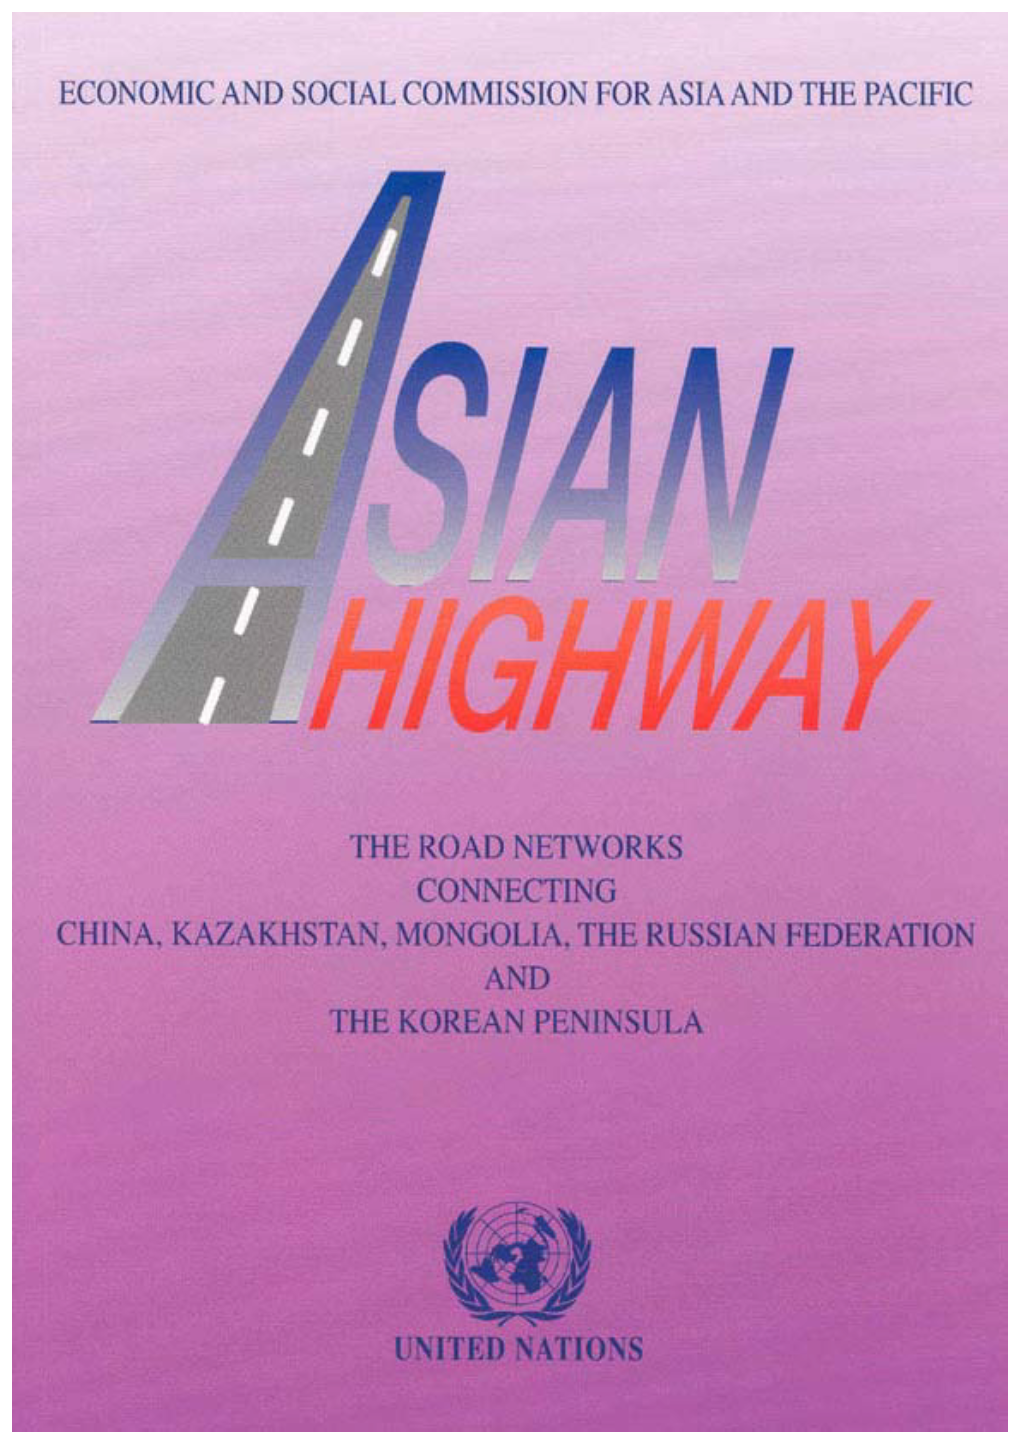 Intergovernmental Agreement on the Asian Highway Network